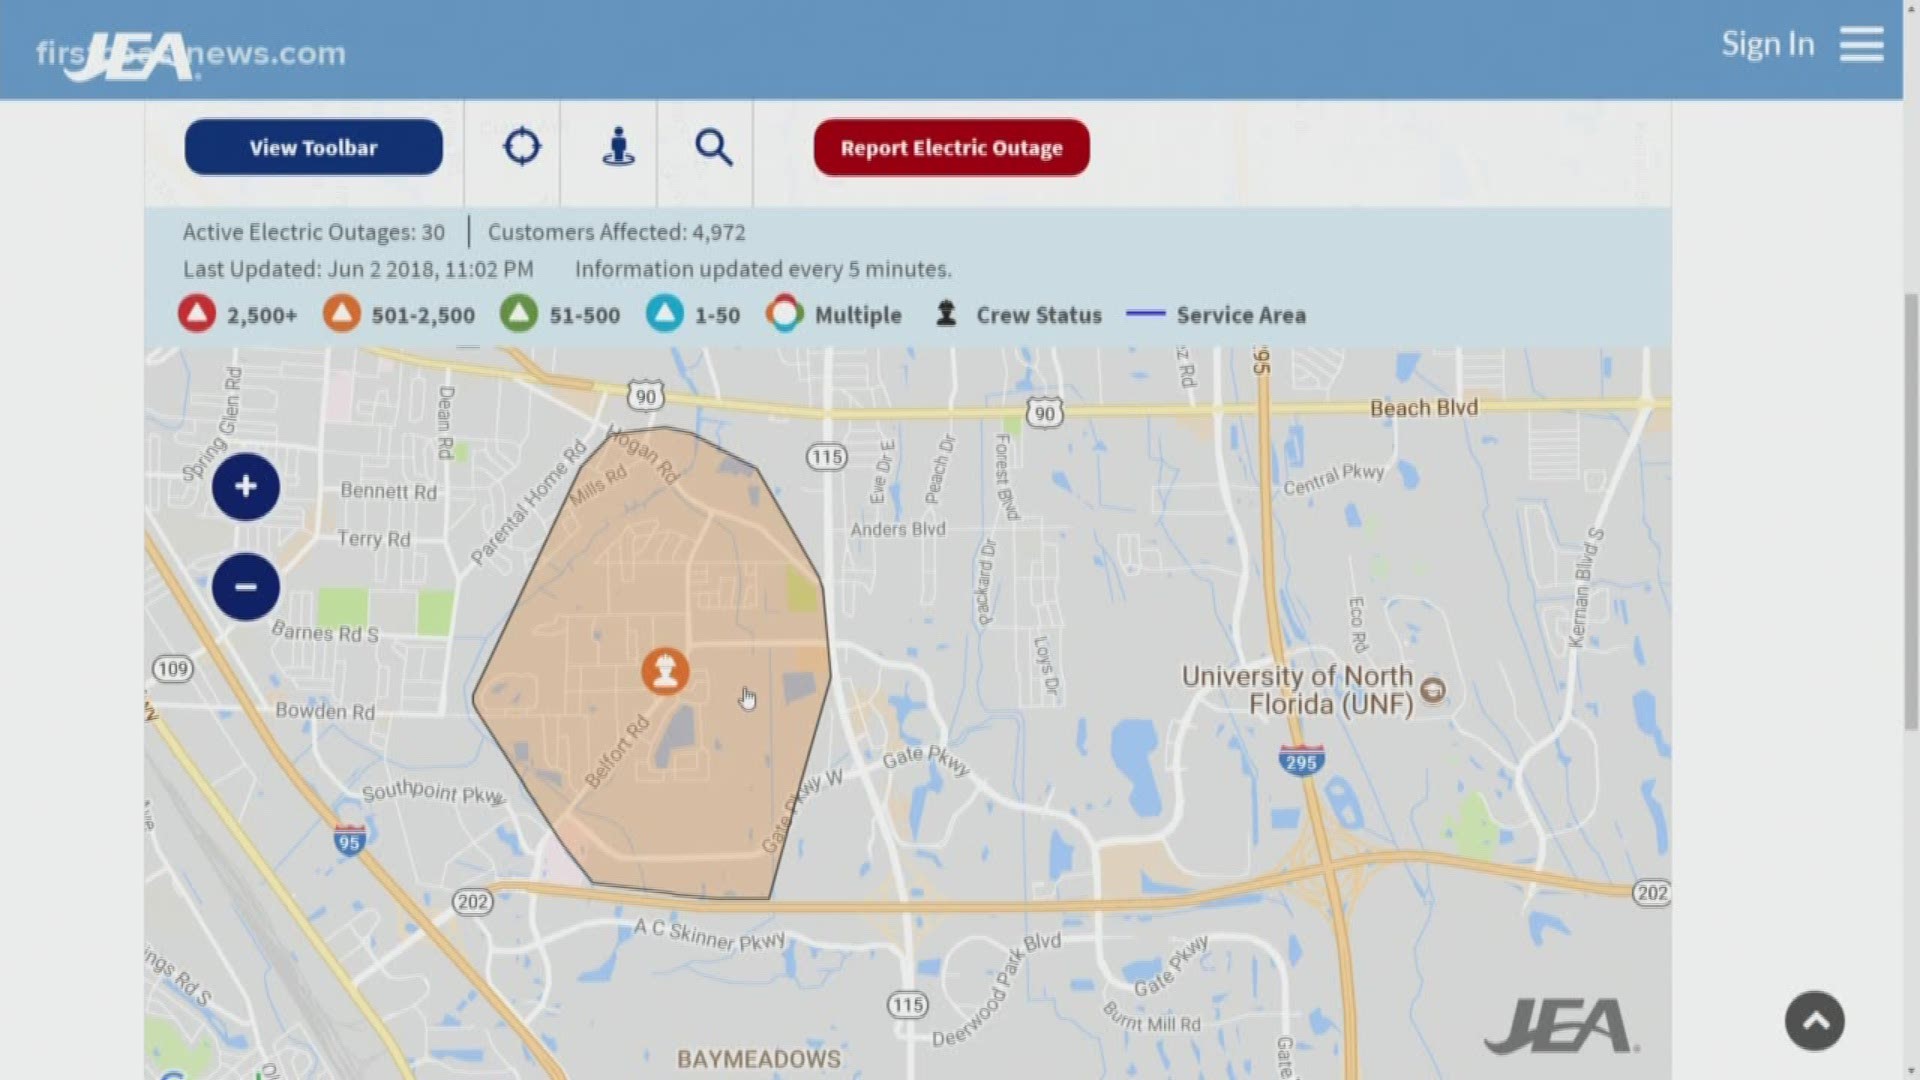 JEA is working to restore power to thousands on the Southside following an outage Saturday night.